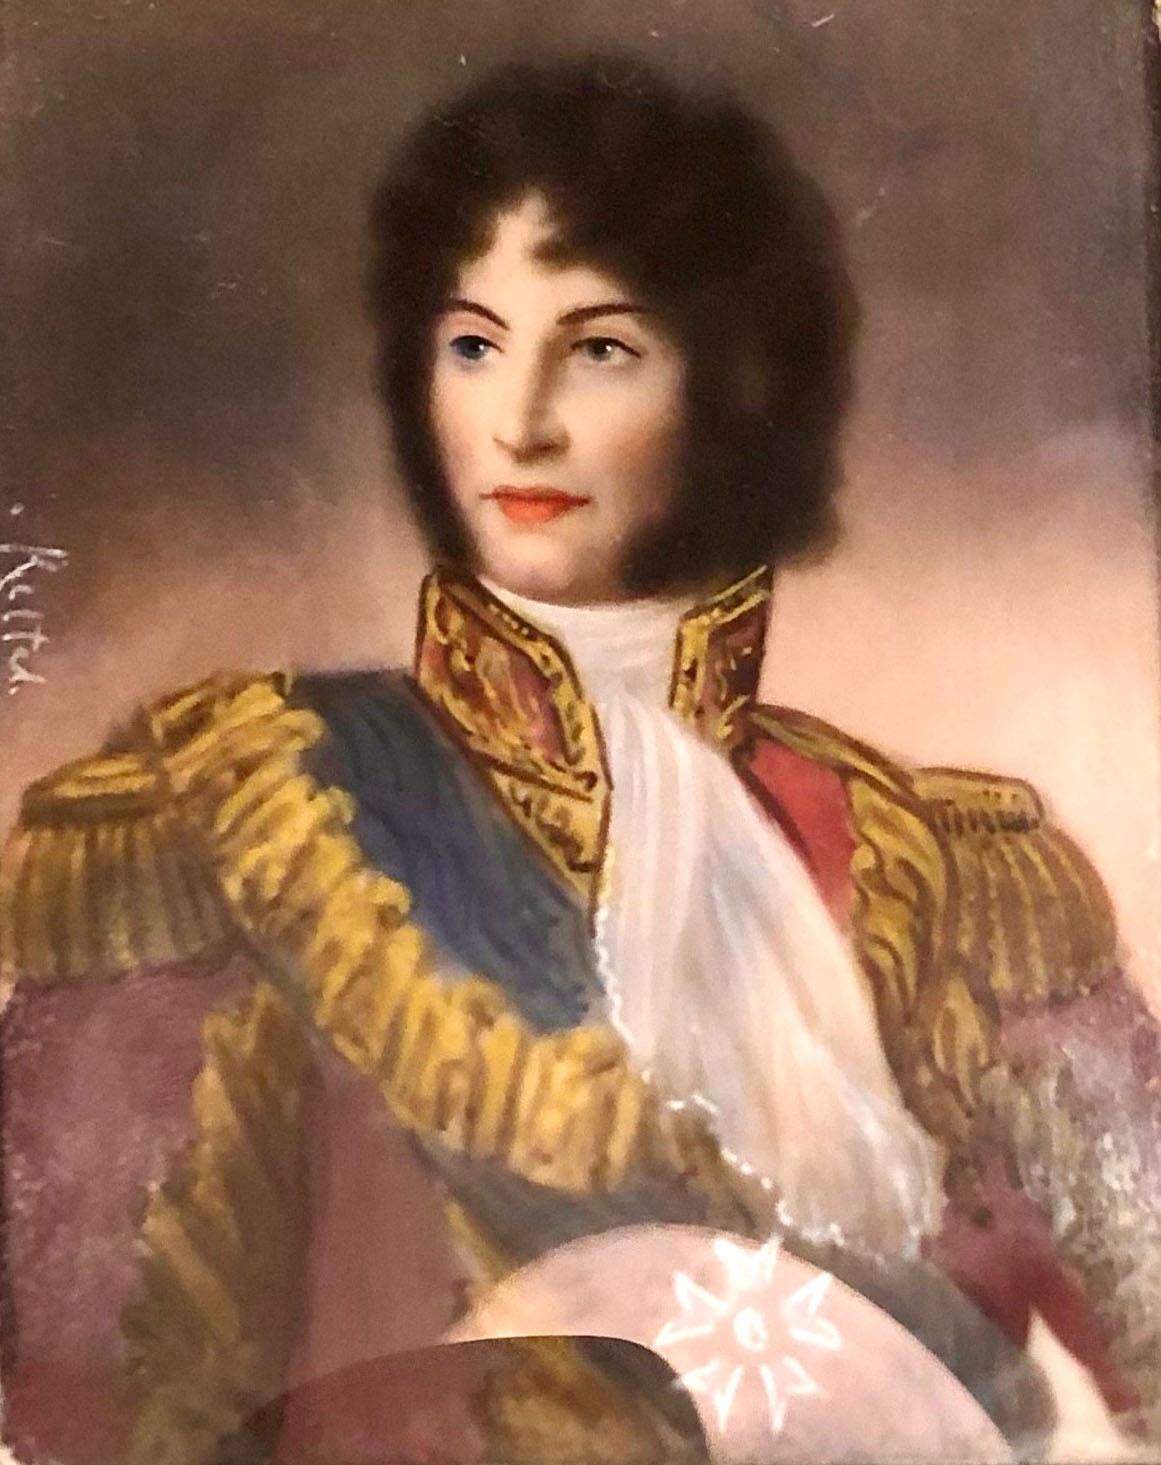 Painting of a cavalier soldier or an aristocrat on ivory signed cannot make out the signature it is a bronze jewelry frame with tiny pearls all the way around ten pearls all together. Turn of the century or older.